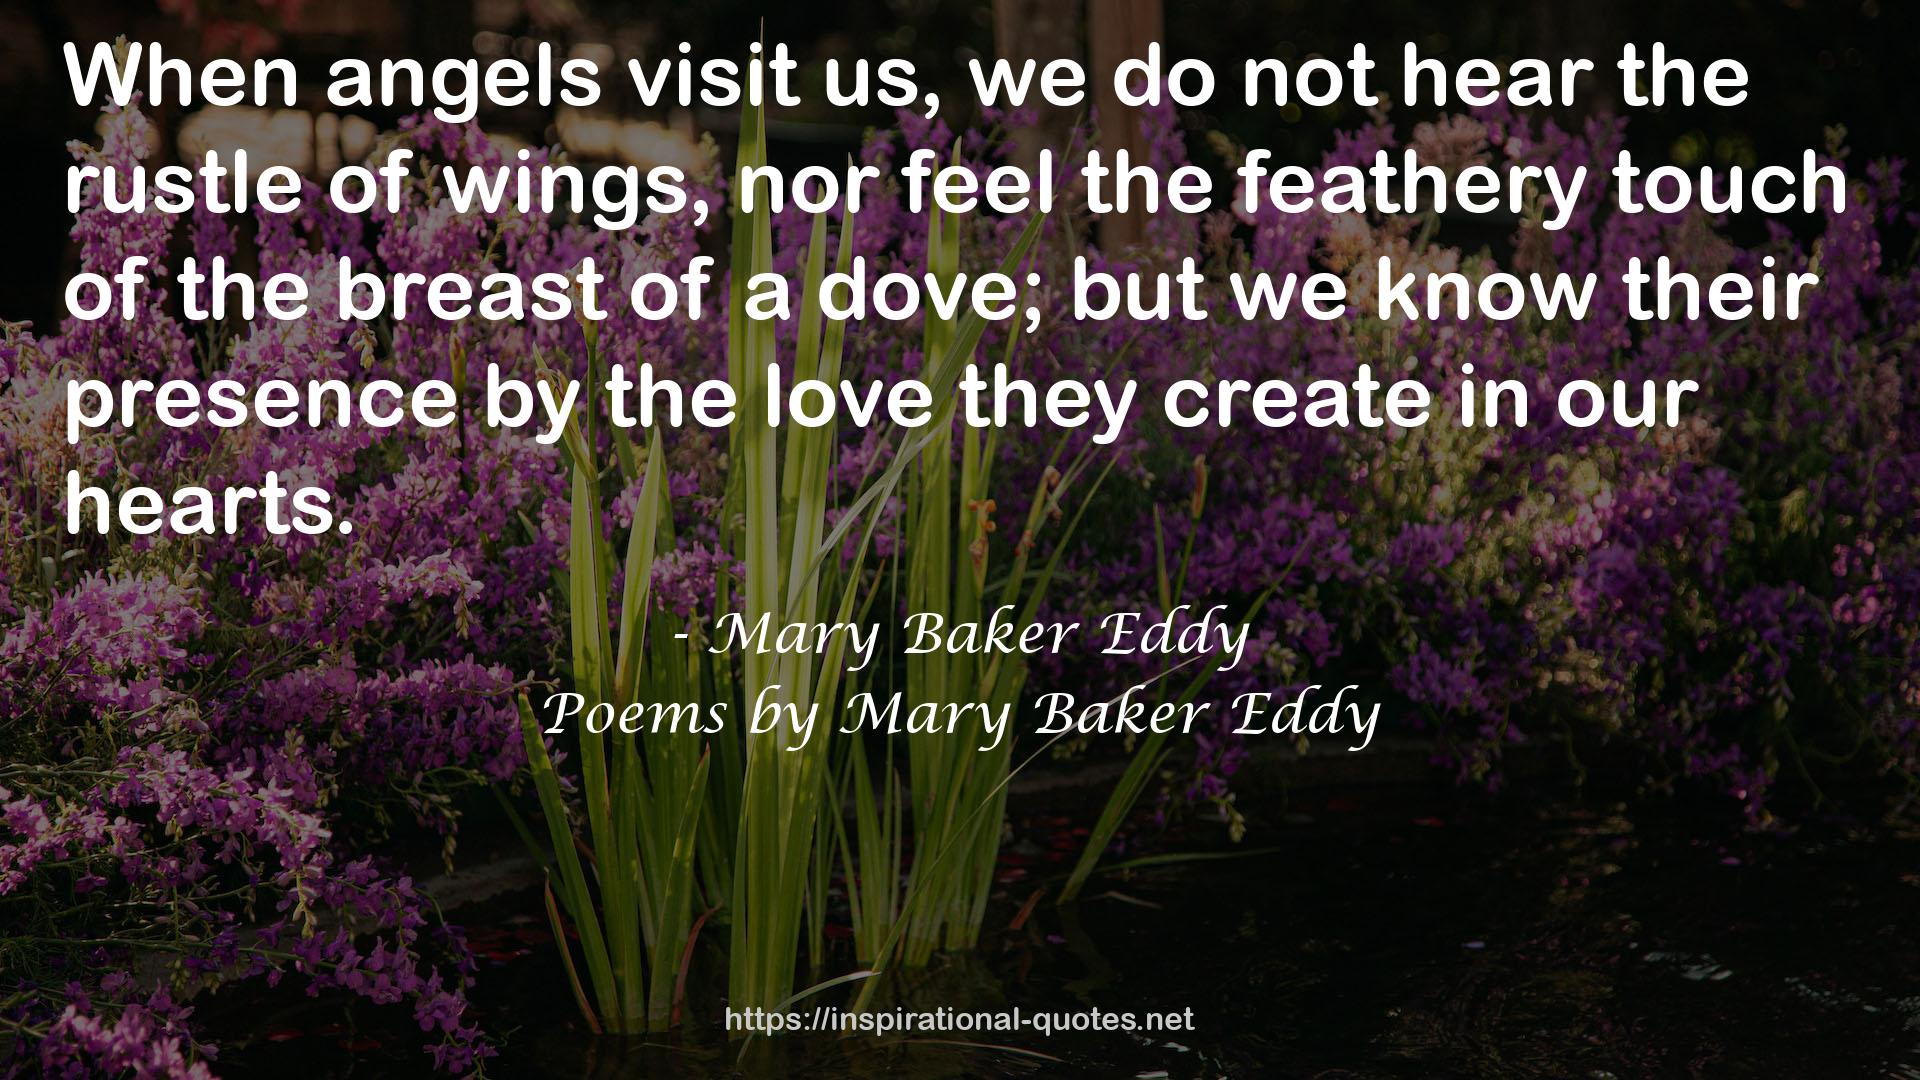 Mary Baker Eddy QUOTES